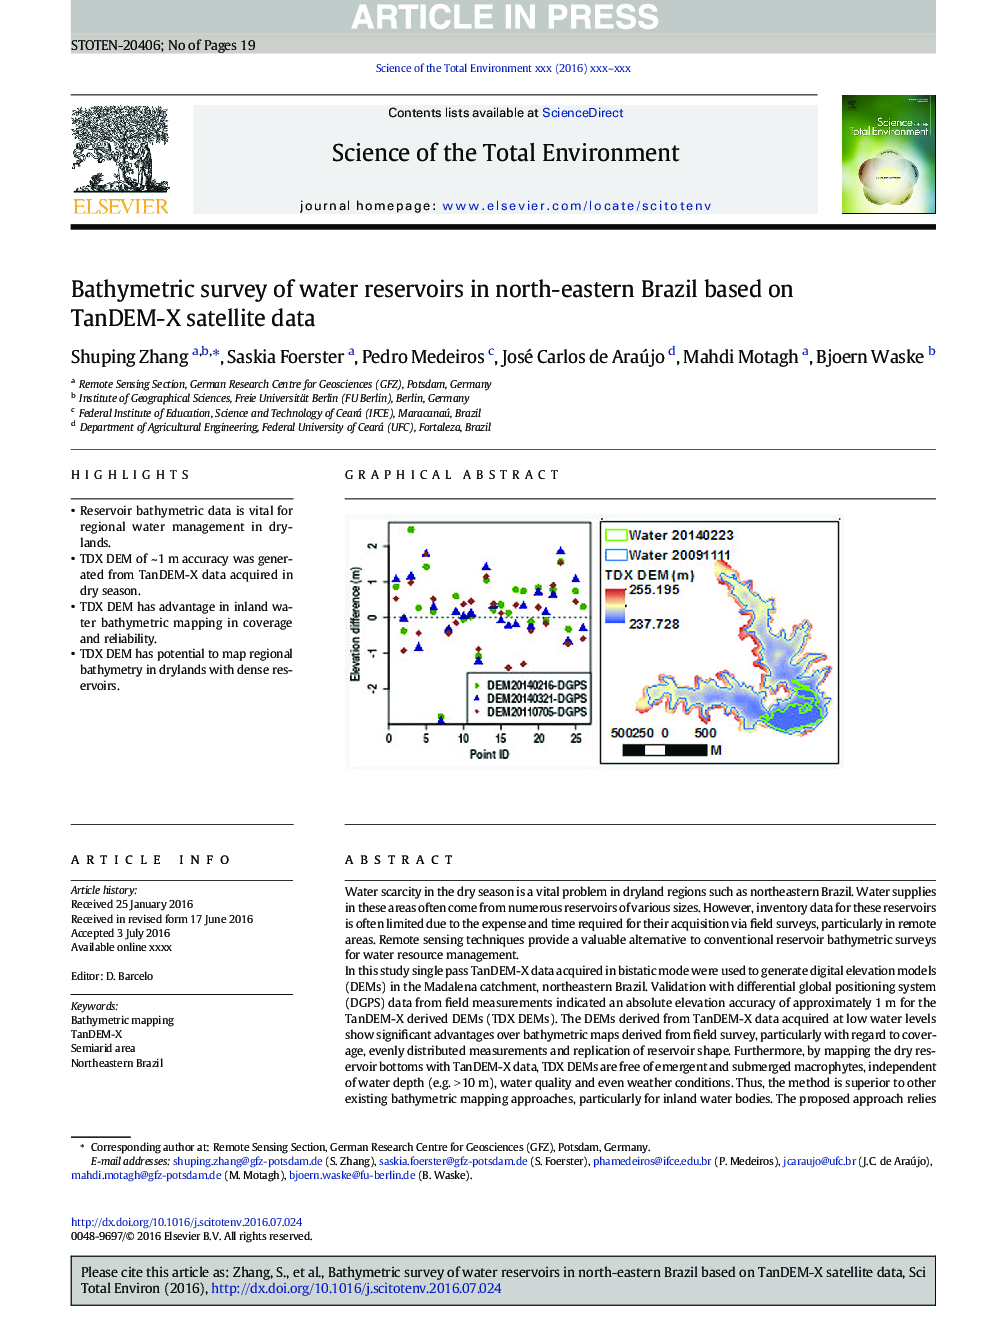 Bathymetric survey of water reservoirs in north-eastern Brazil based on TanDEM-X satellite data